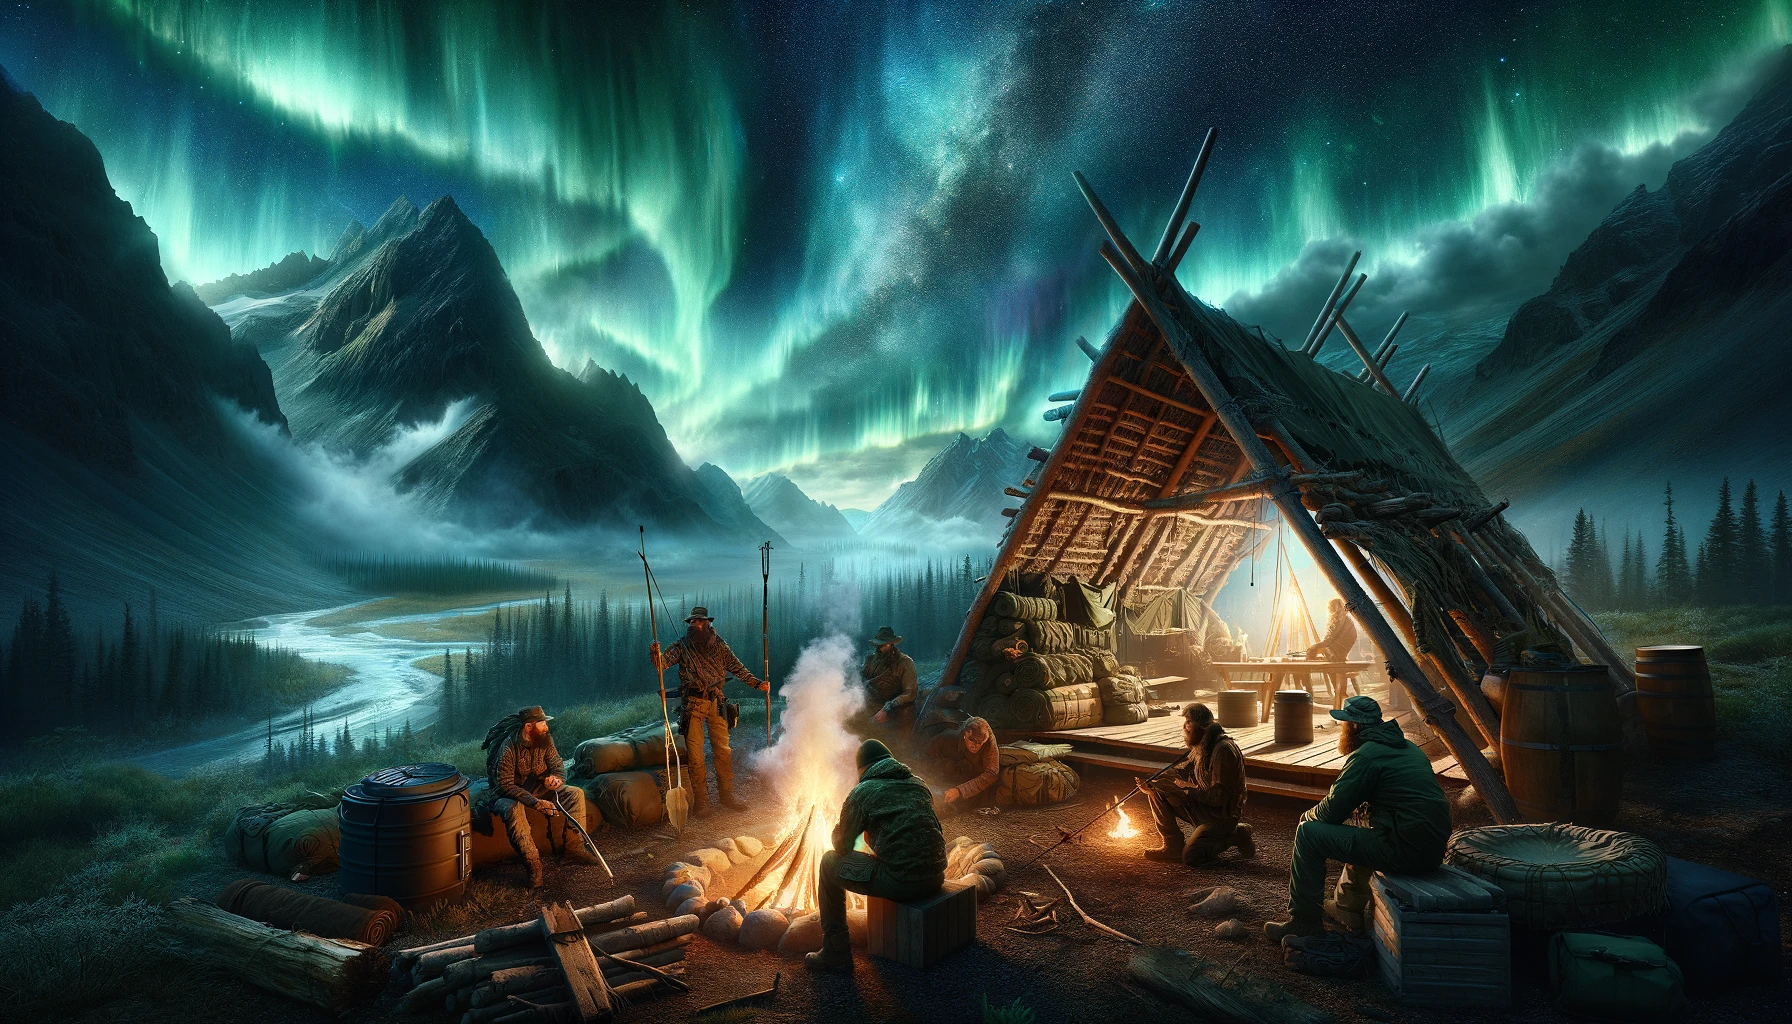 Dramatic wilderness survival scene with preppers around a large shelter and fire pit, demonstrating skills like water purification and hunting with a bow, set against a mountainous landscape under a starry sky with the aurora borealis, embodying unity, skill, and resilience.